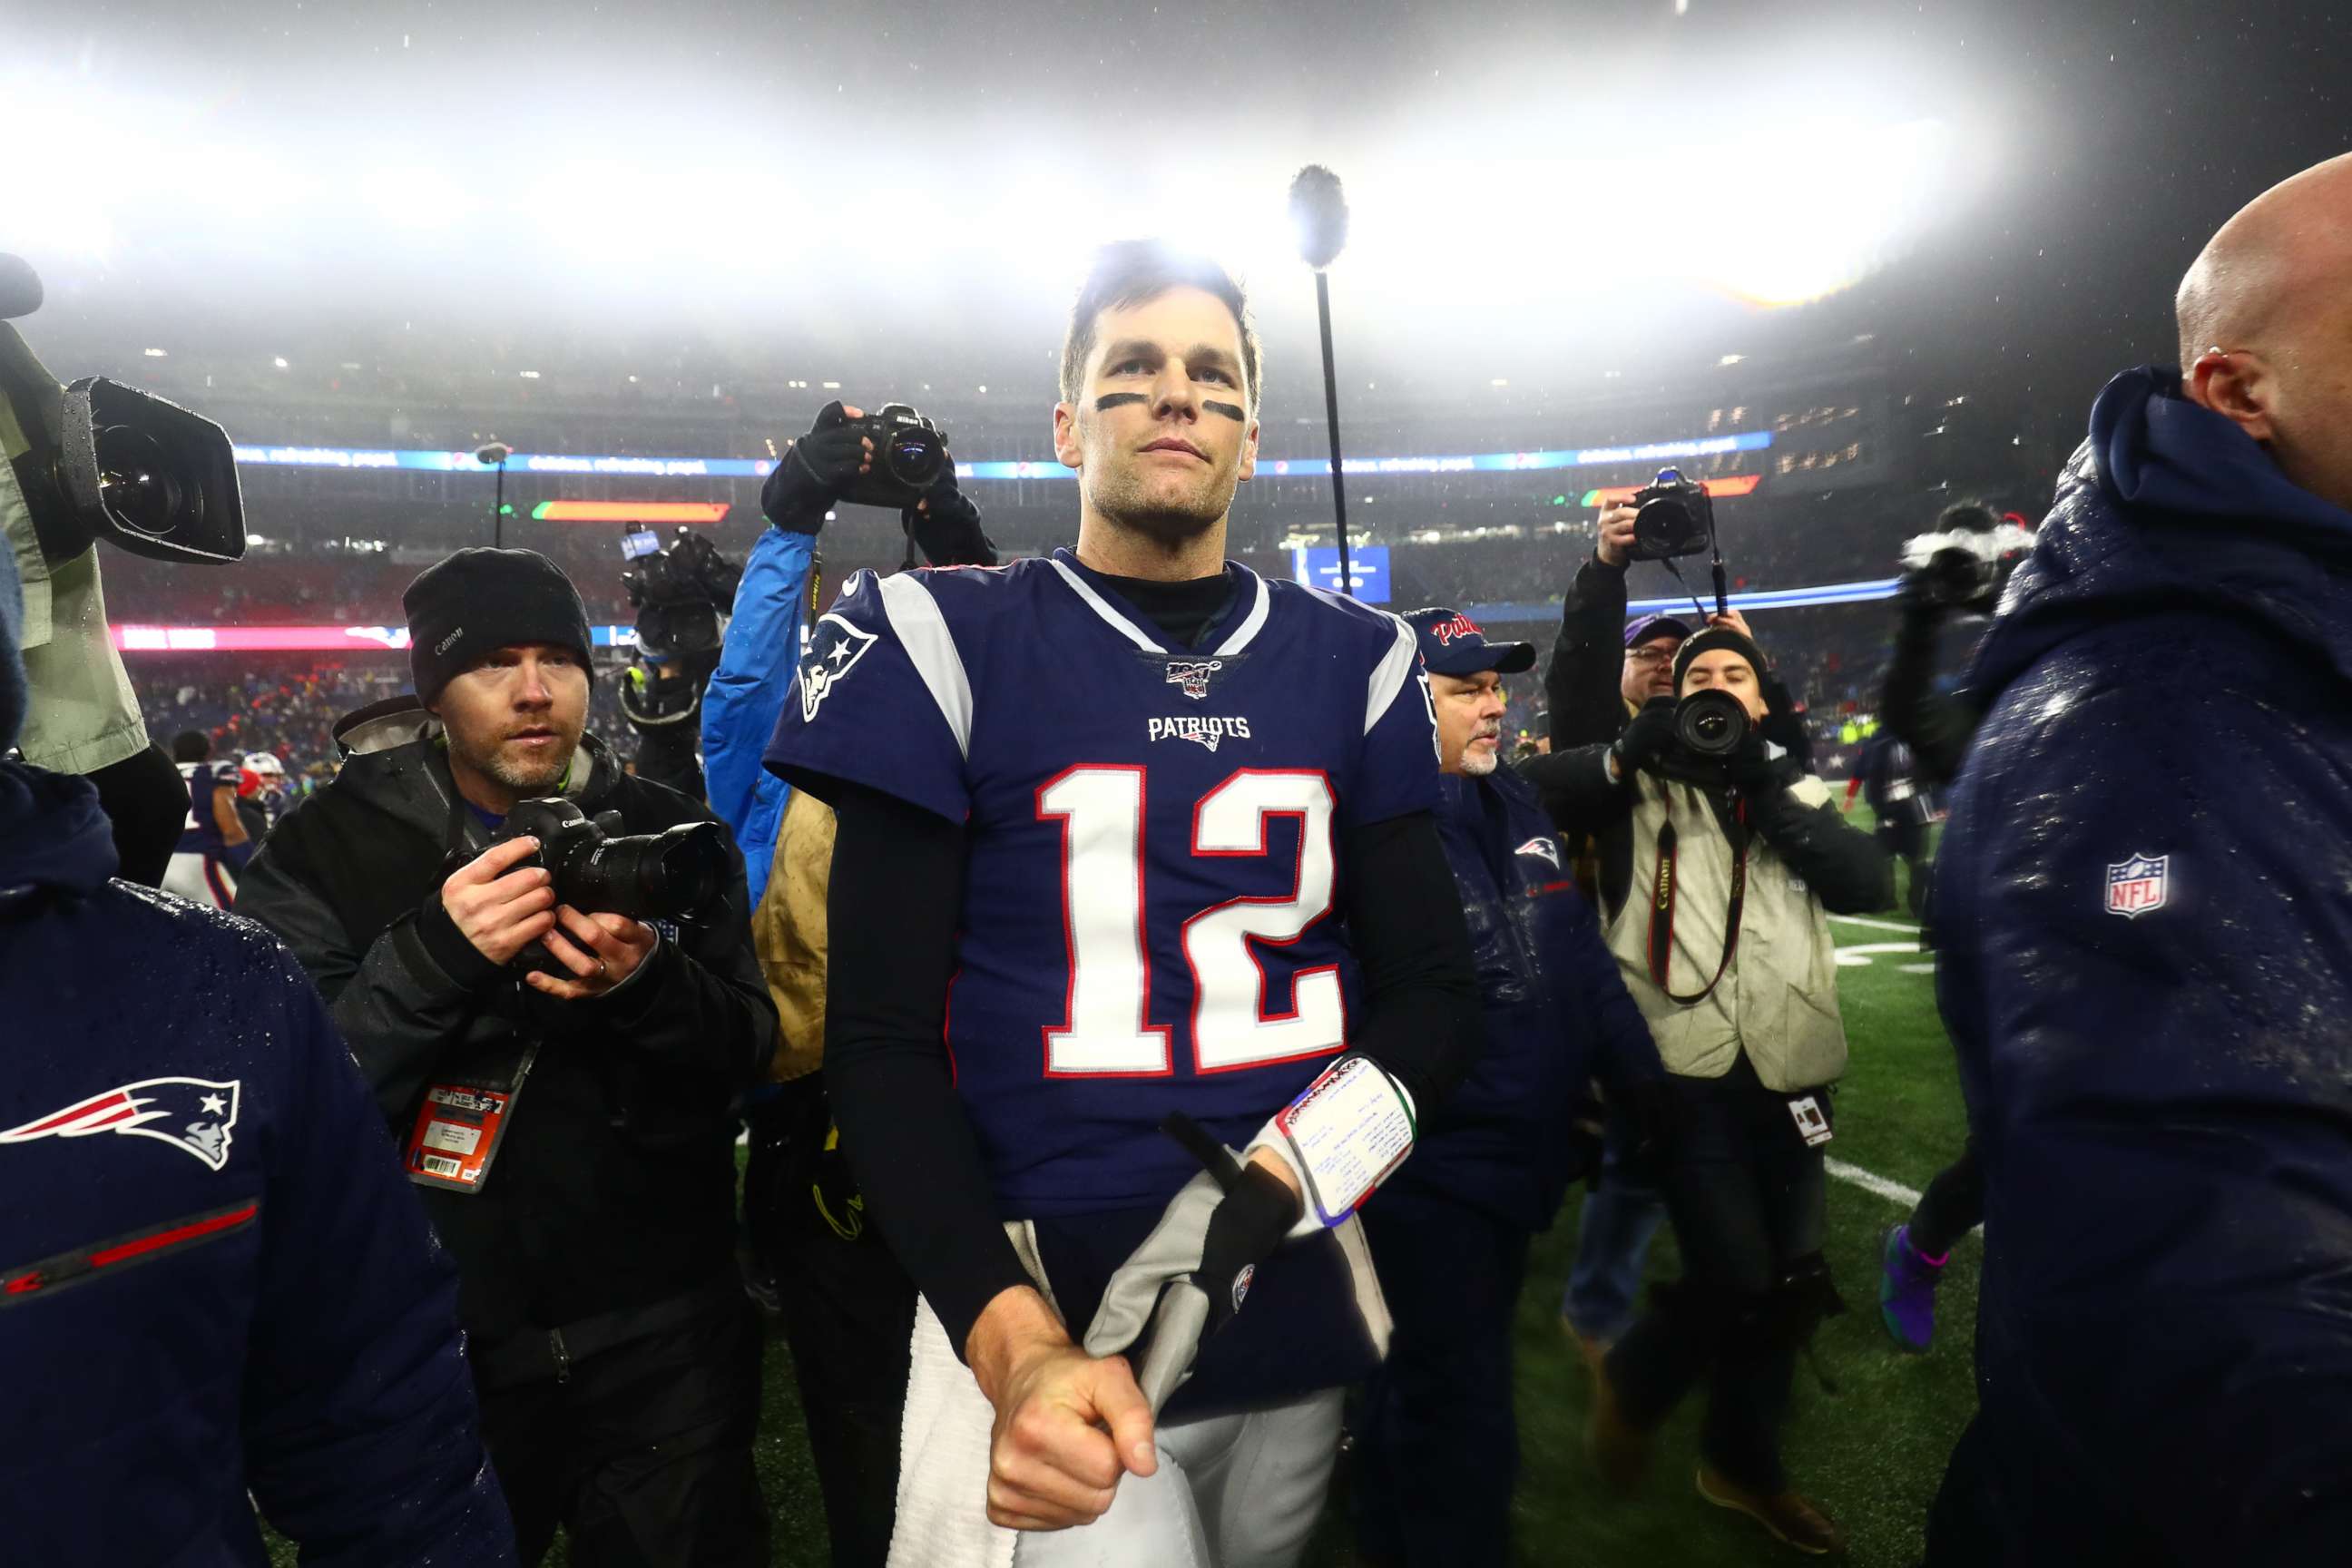 PHOTO: FOXBOROUGH, MASSACHUSETTS - JANUARY 04: Tom Brady #12 of the New England Patriots is seen after their 20-13 loss to the Tennessee Titans in the AFC Wild Card Playoff game at Gillette Stadium on January 04, 2020 in Foxborough, Massachusetts.